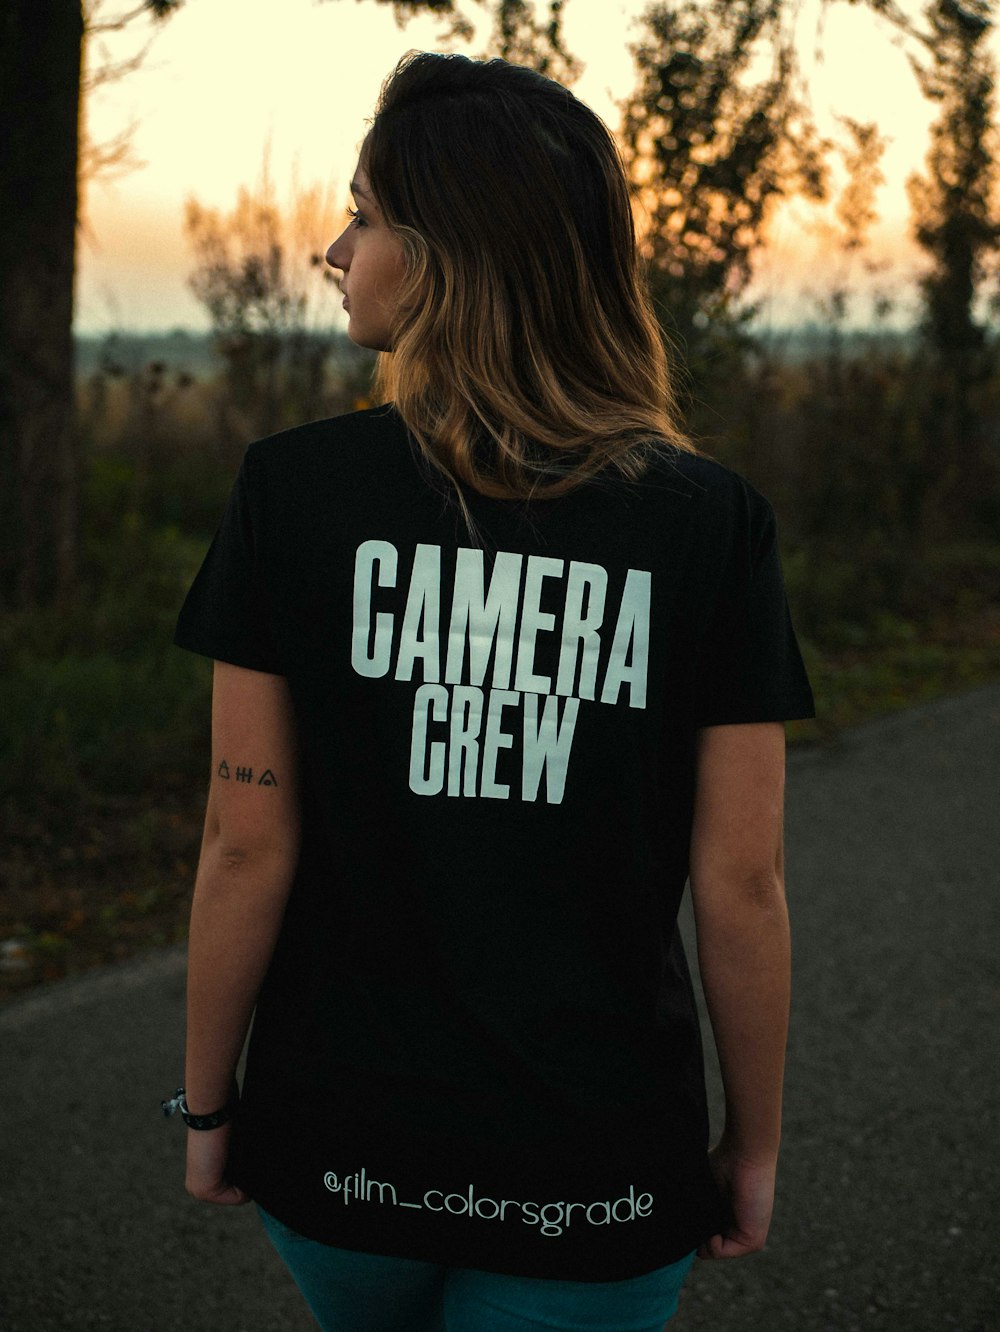 woman in black and white crew neck t-shirt standing on road during daytime